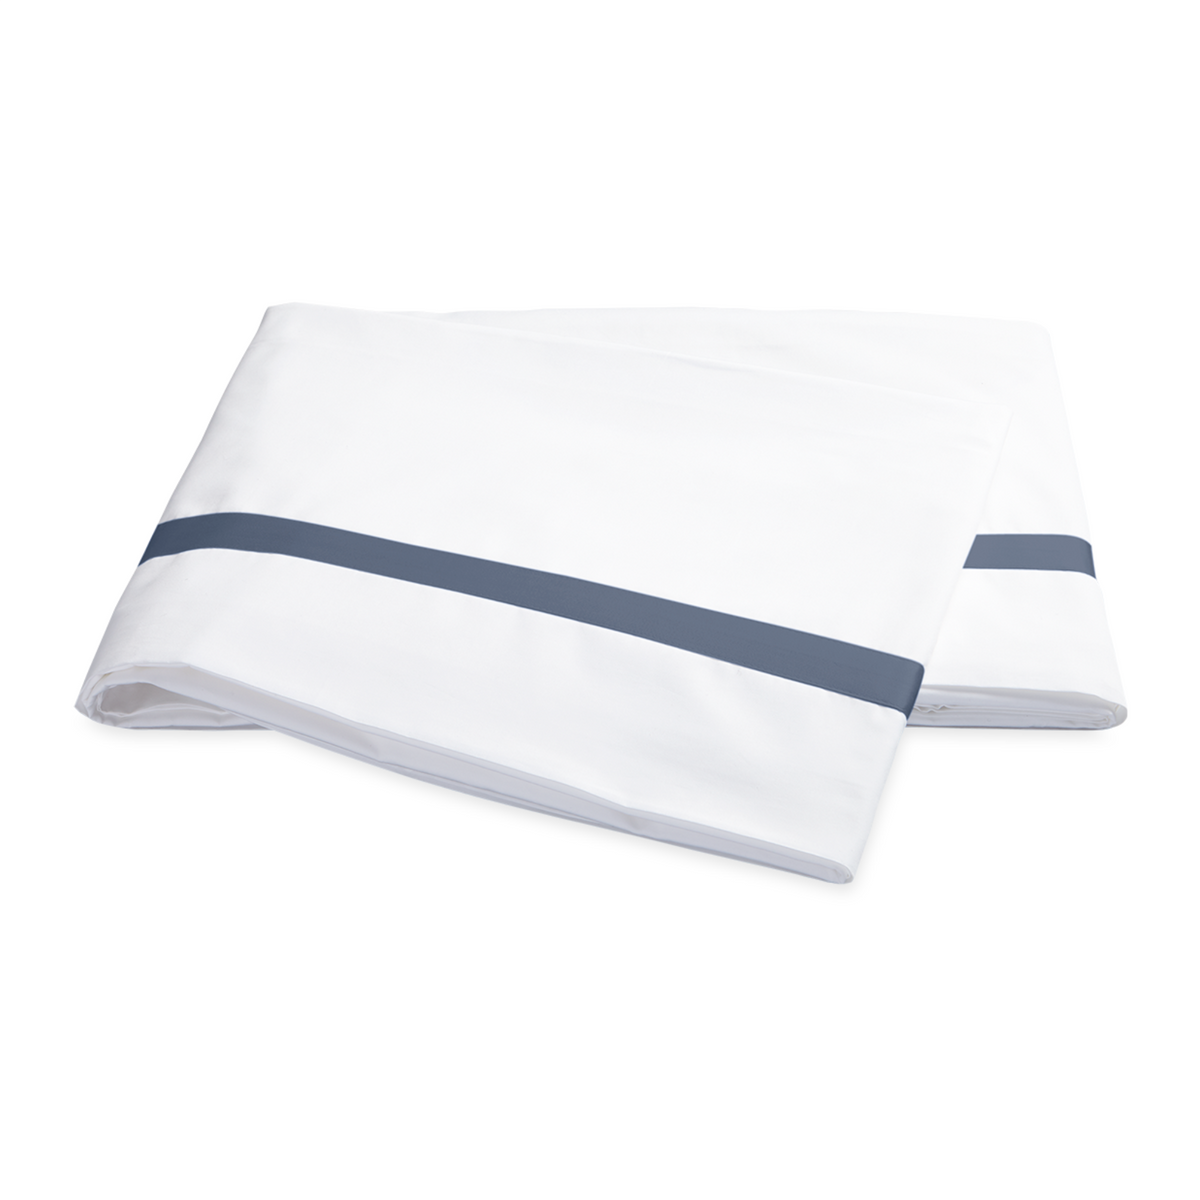 Folded Flat Sheet of Matouk Lowell Bedding Pillowcases in Steel Blue Color